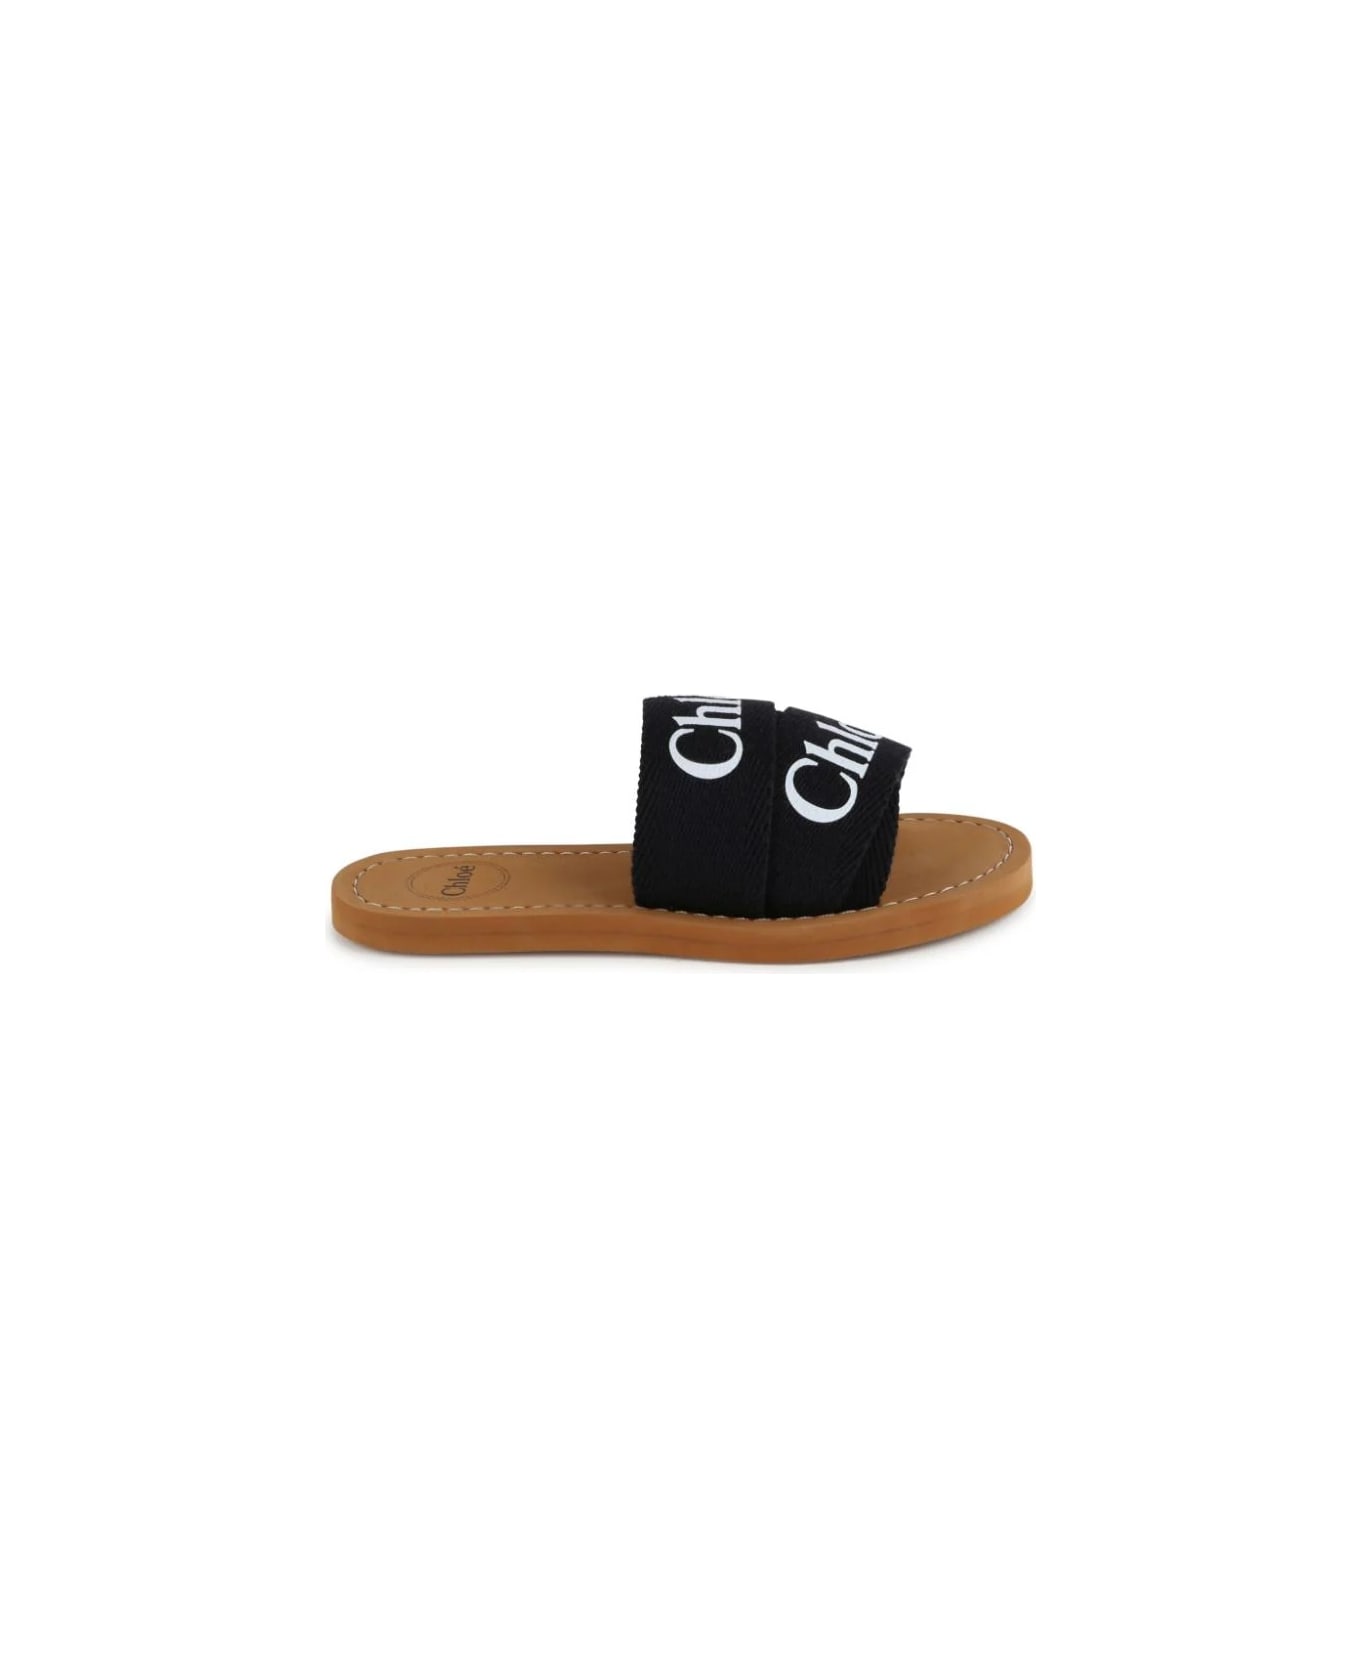 Chloé Woody Sandals In Black Canvas With Logo - Nero シューズ